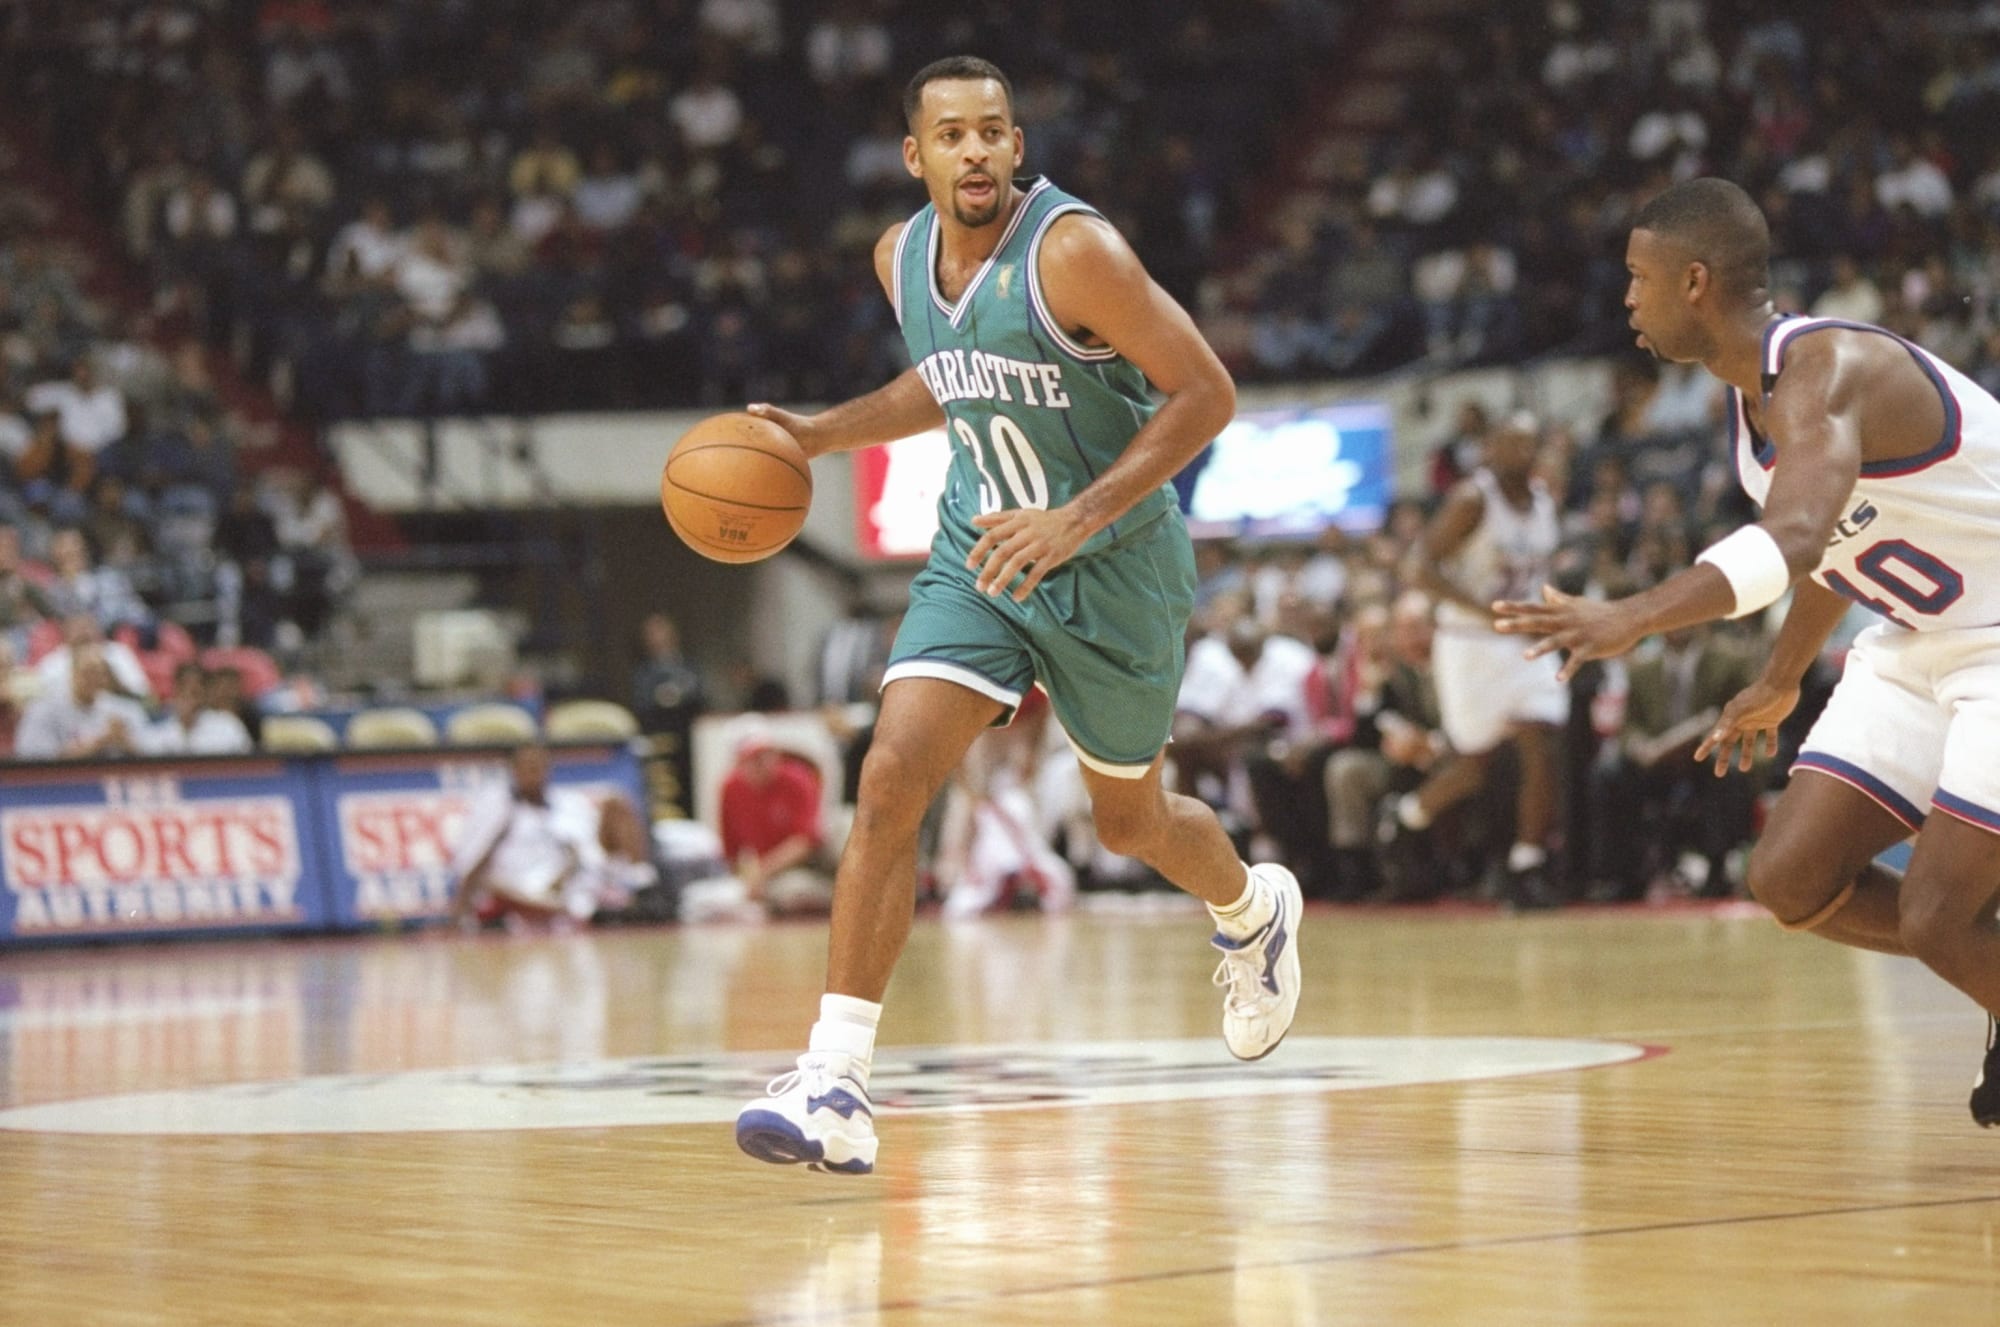 Charlotte Hornets: When will Dell Curry have his number retired?